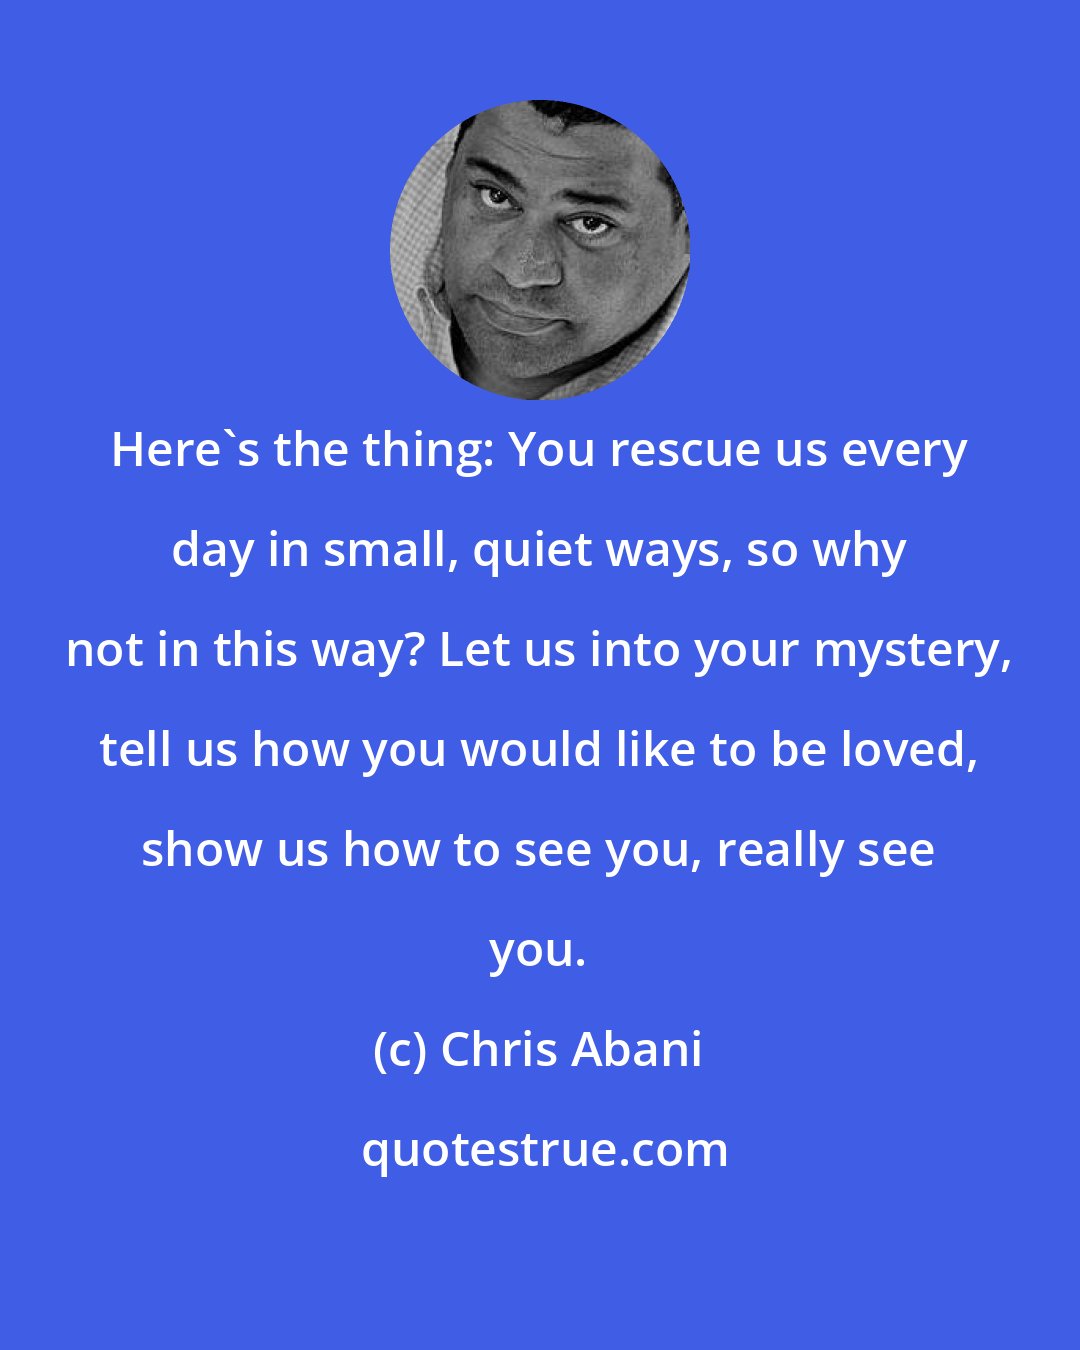 Chris Abani: Here's the thing: You rescue us every day in small, quiet ways, so why not in this way? Let us into your mystery, tell us how you would like to be loved, show us how to see you, really see you.